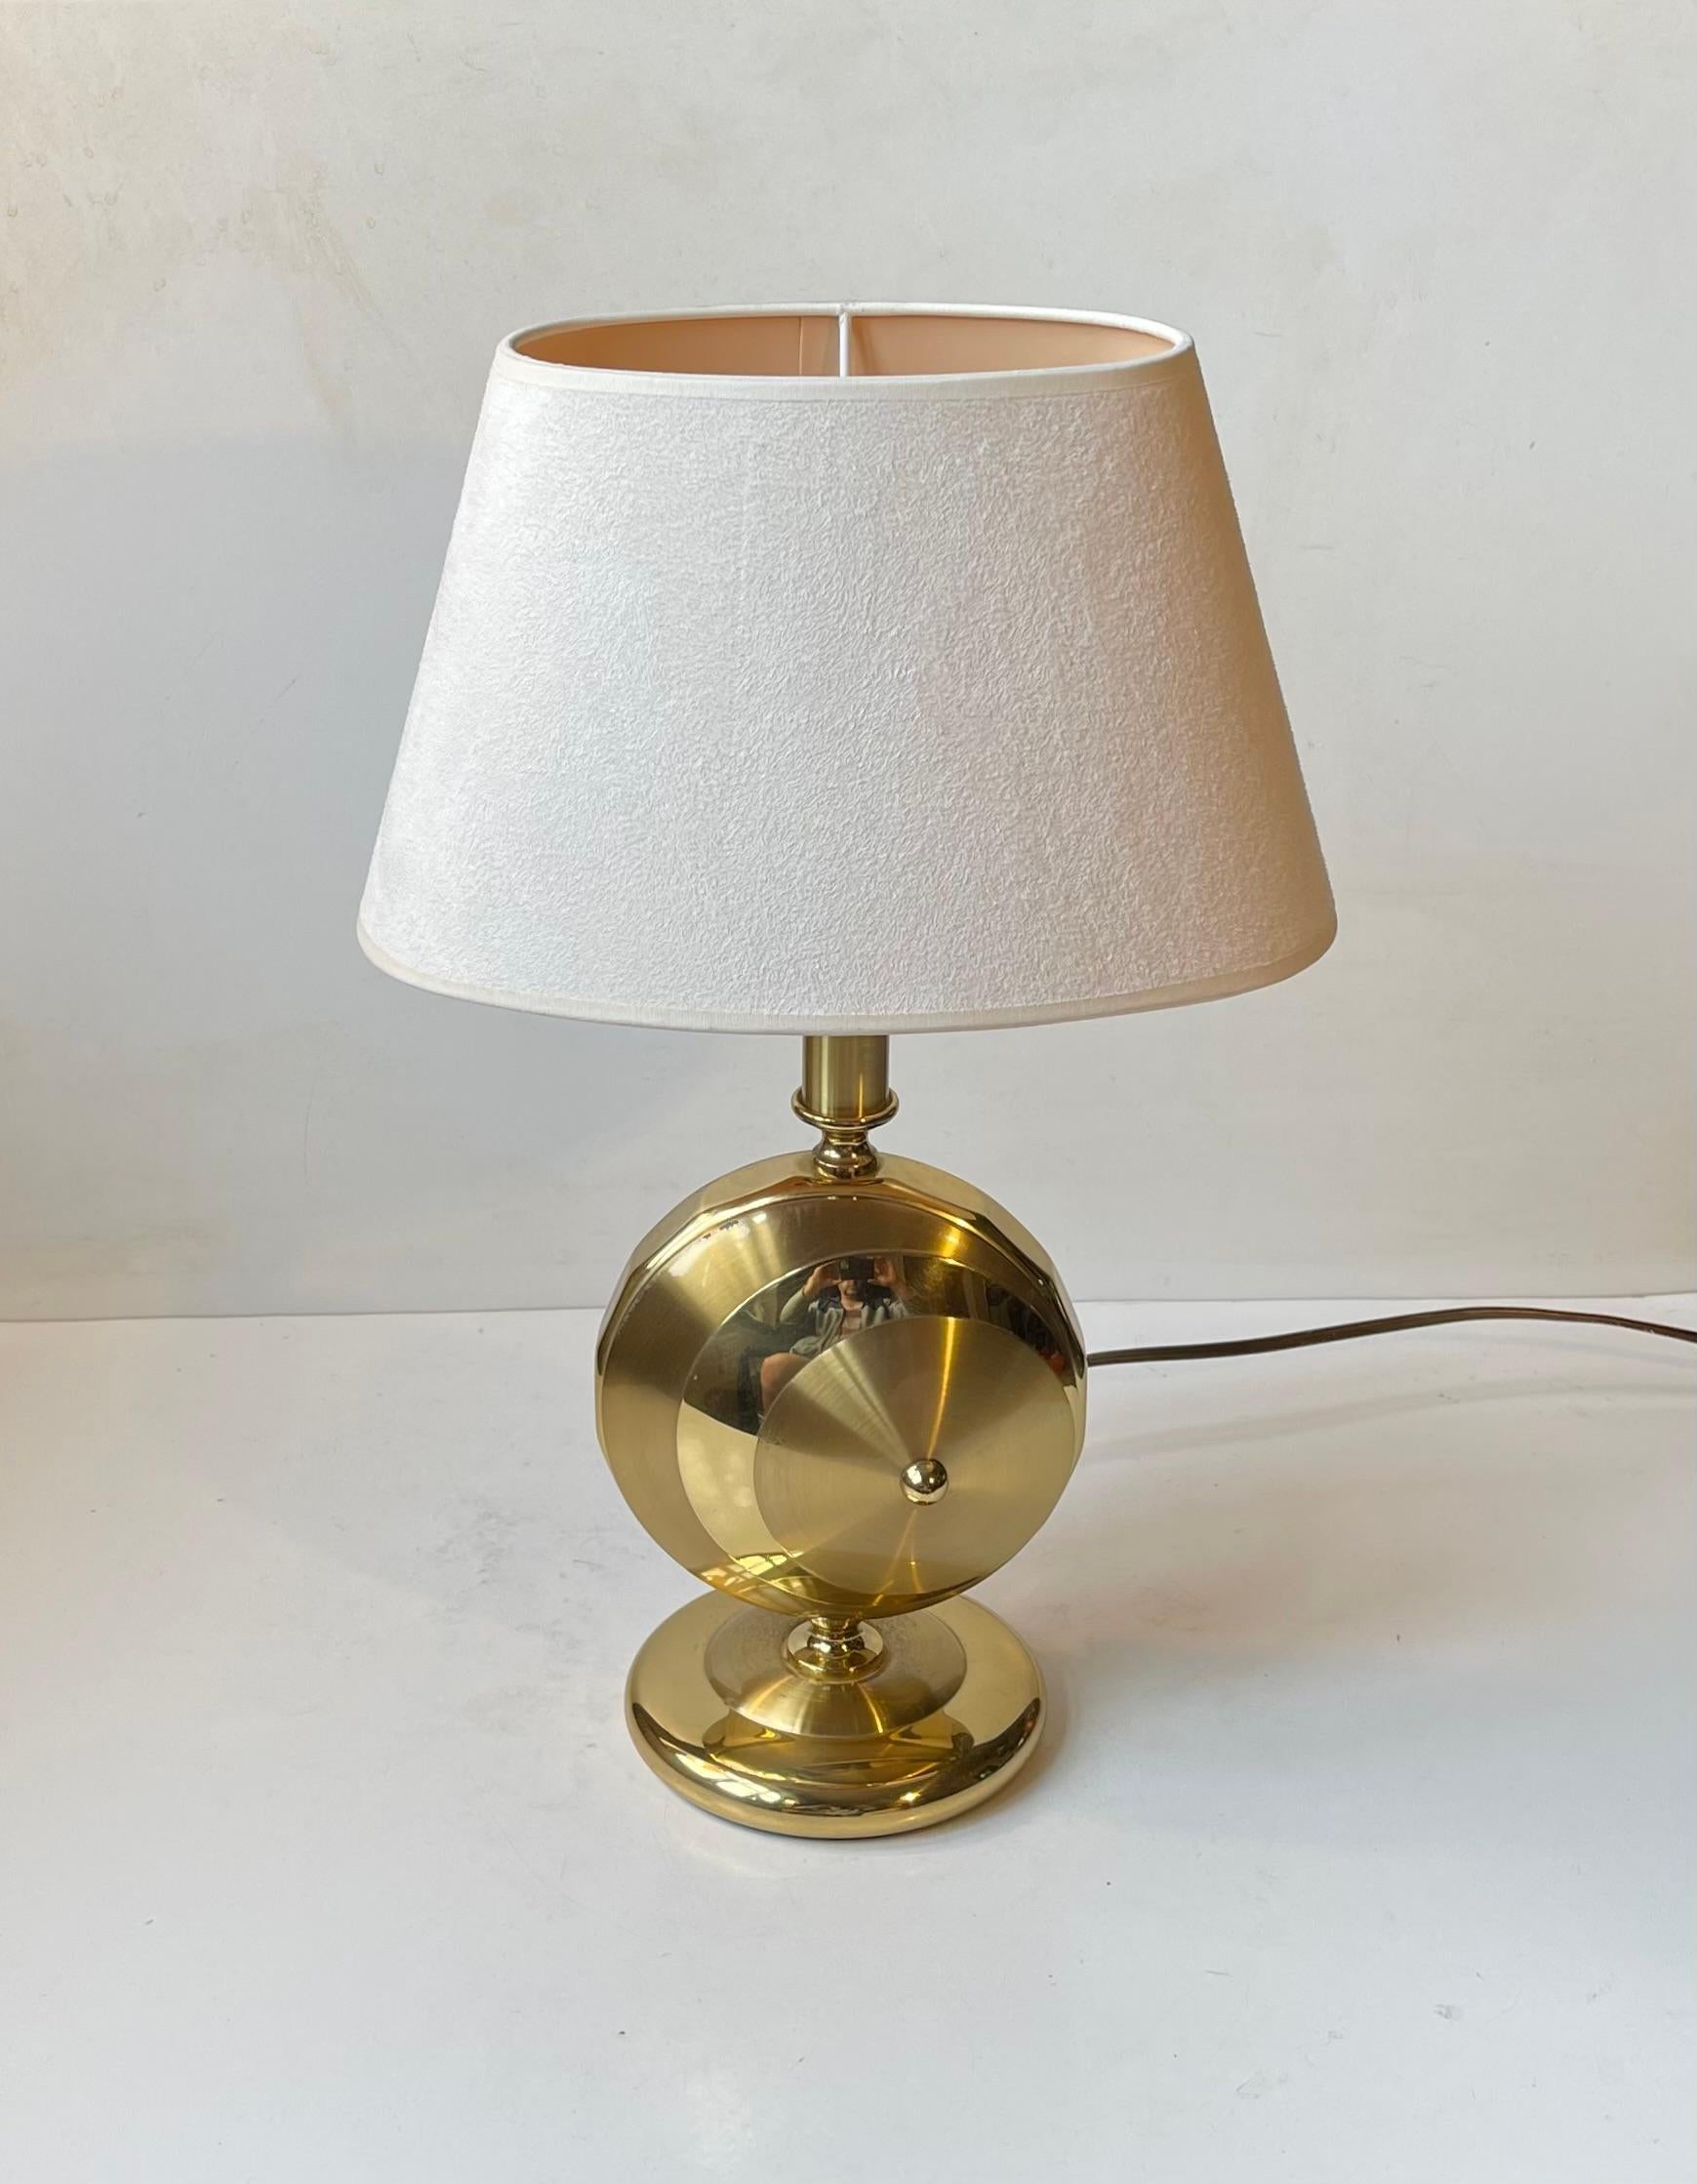 Sculptural table light with base in solid brass - partially polished, partially brushed. This particular model was made to fit on a mantle shelf or indoor window sill. It is wide but with a shallow dept. Practical on/of switch to its socket. Its